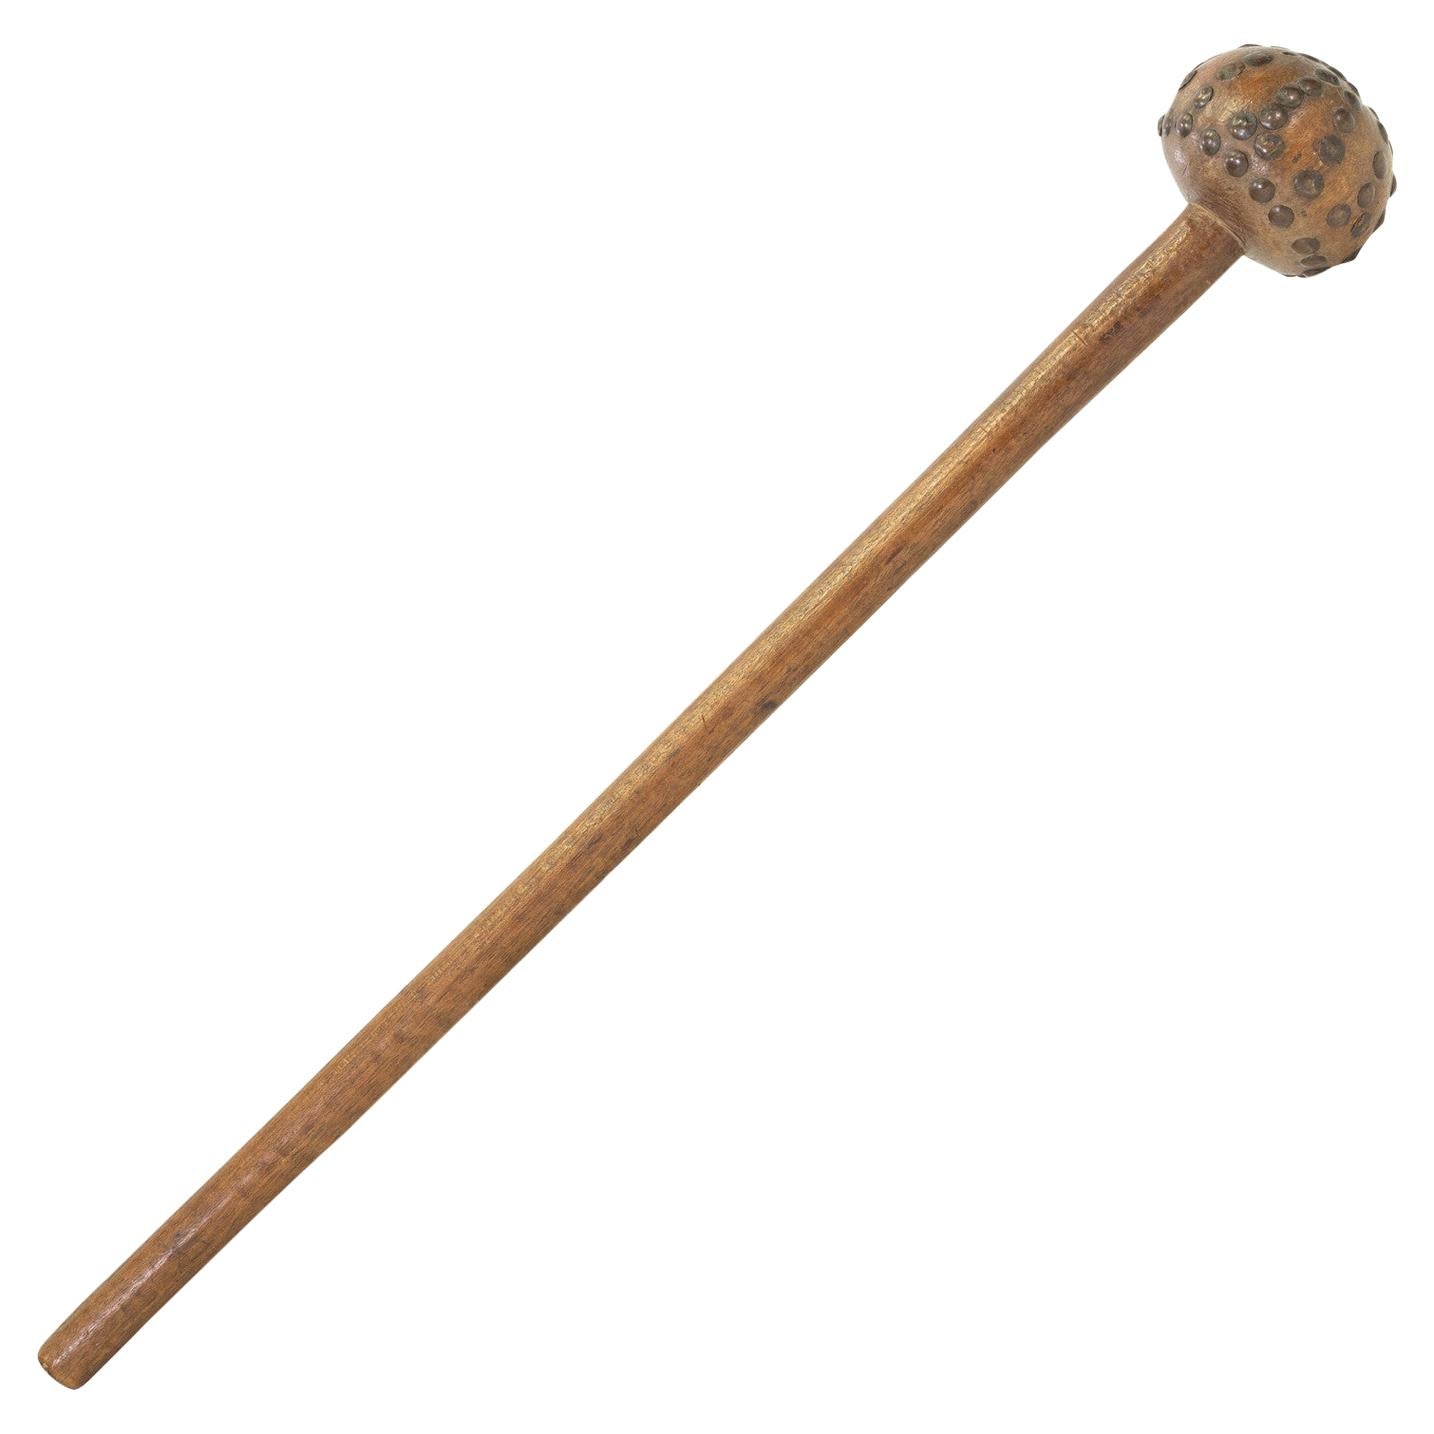 1870s Southern Plains Tacked Ball Headed Club